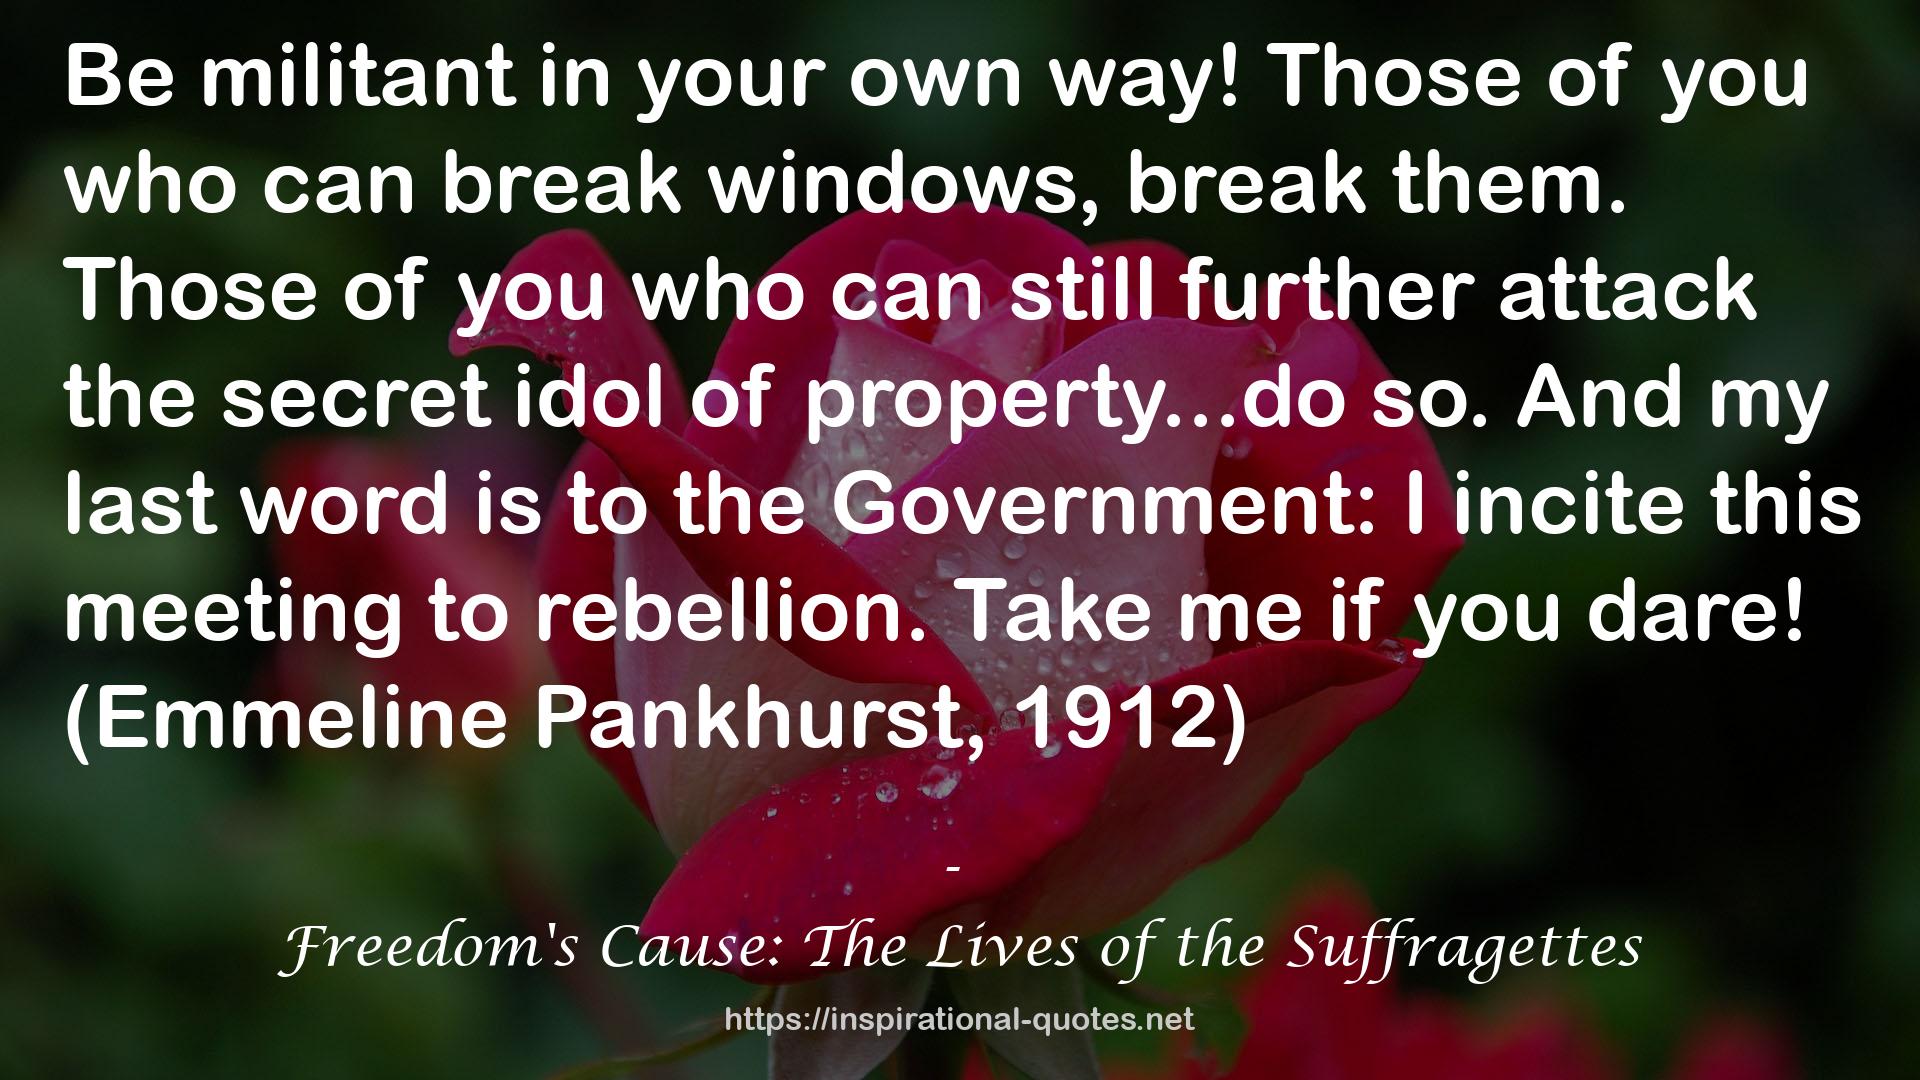 Freedom's Cause: The Lives of the Suffragettes QUOTES